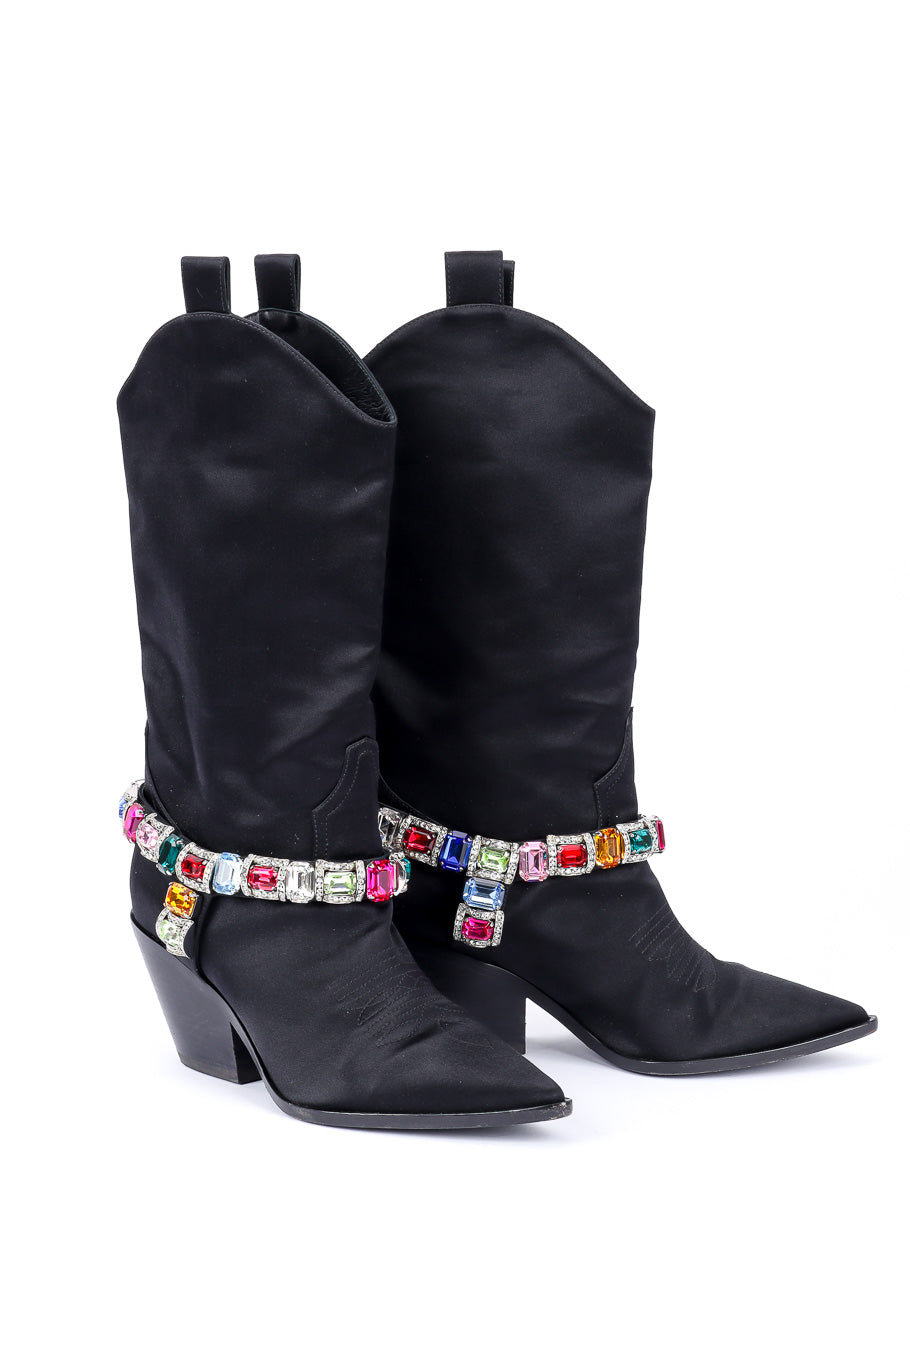 2018 F/W Bejeweled Satin Boots 3/4 front view on white background @Recessla